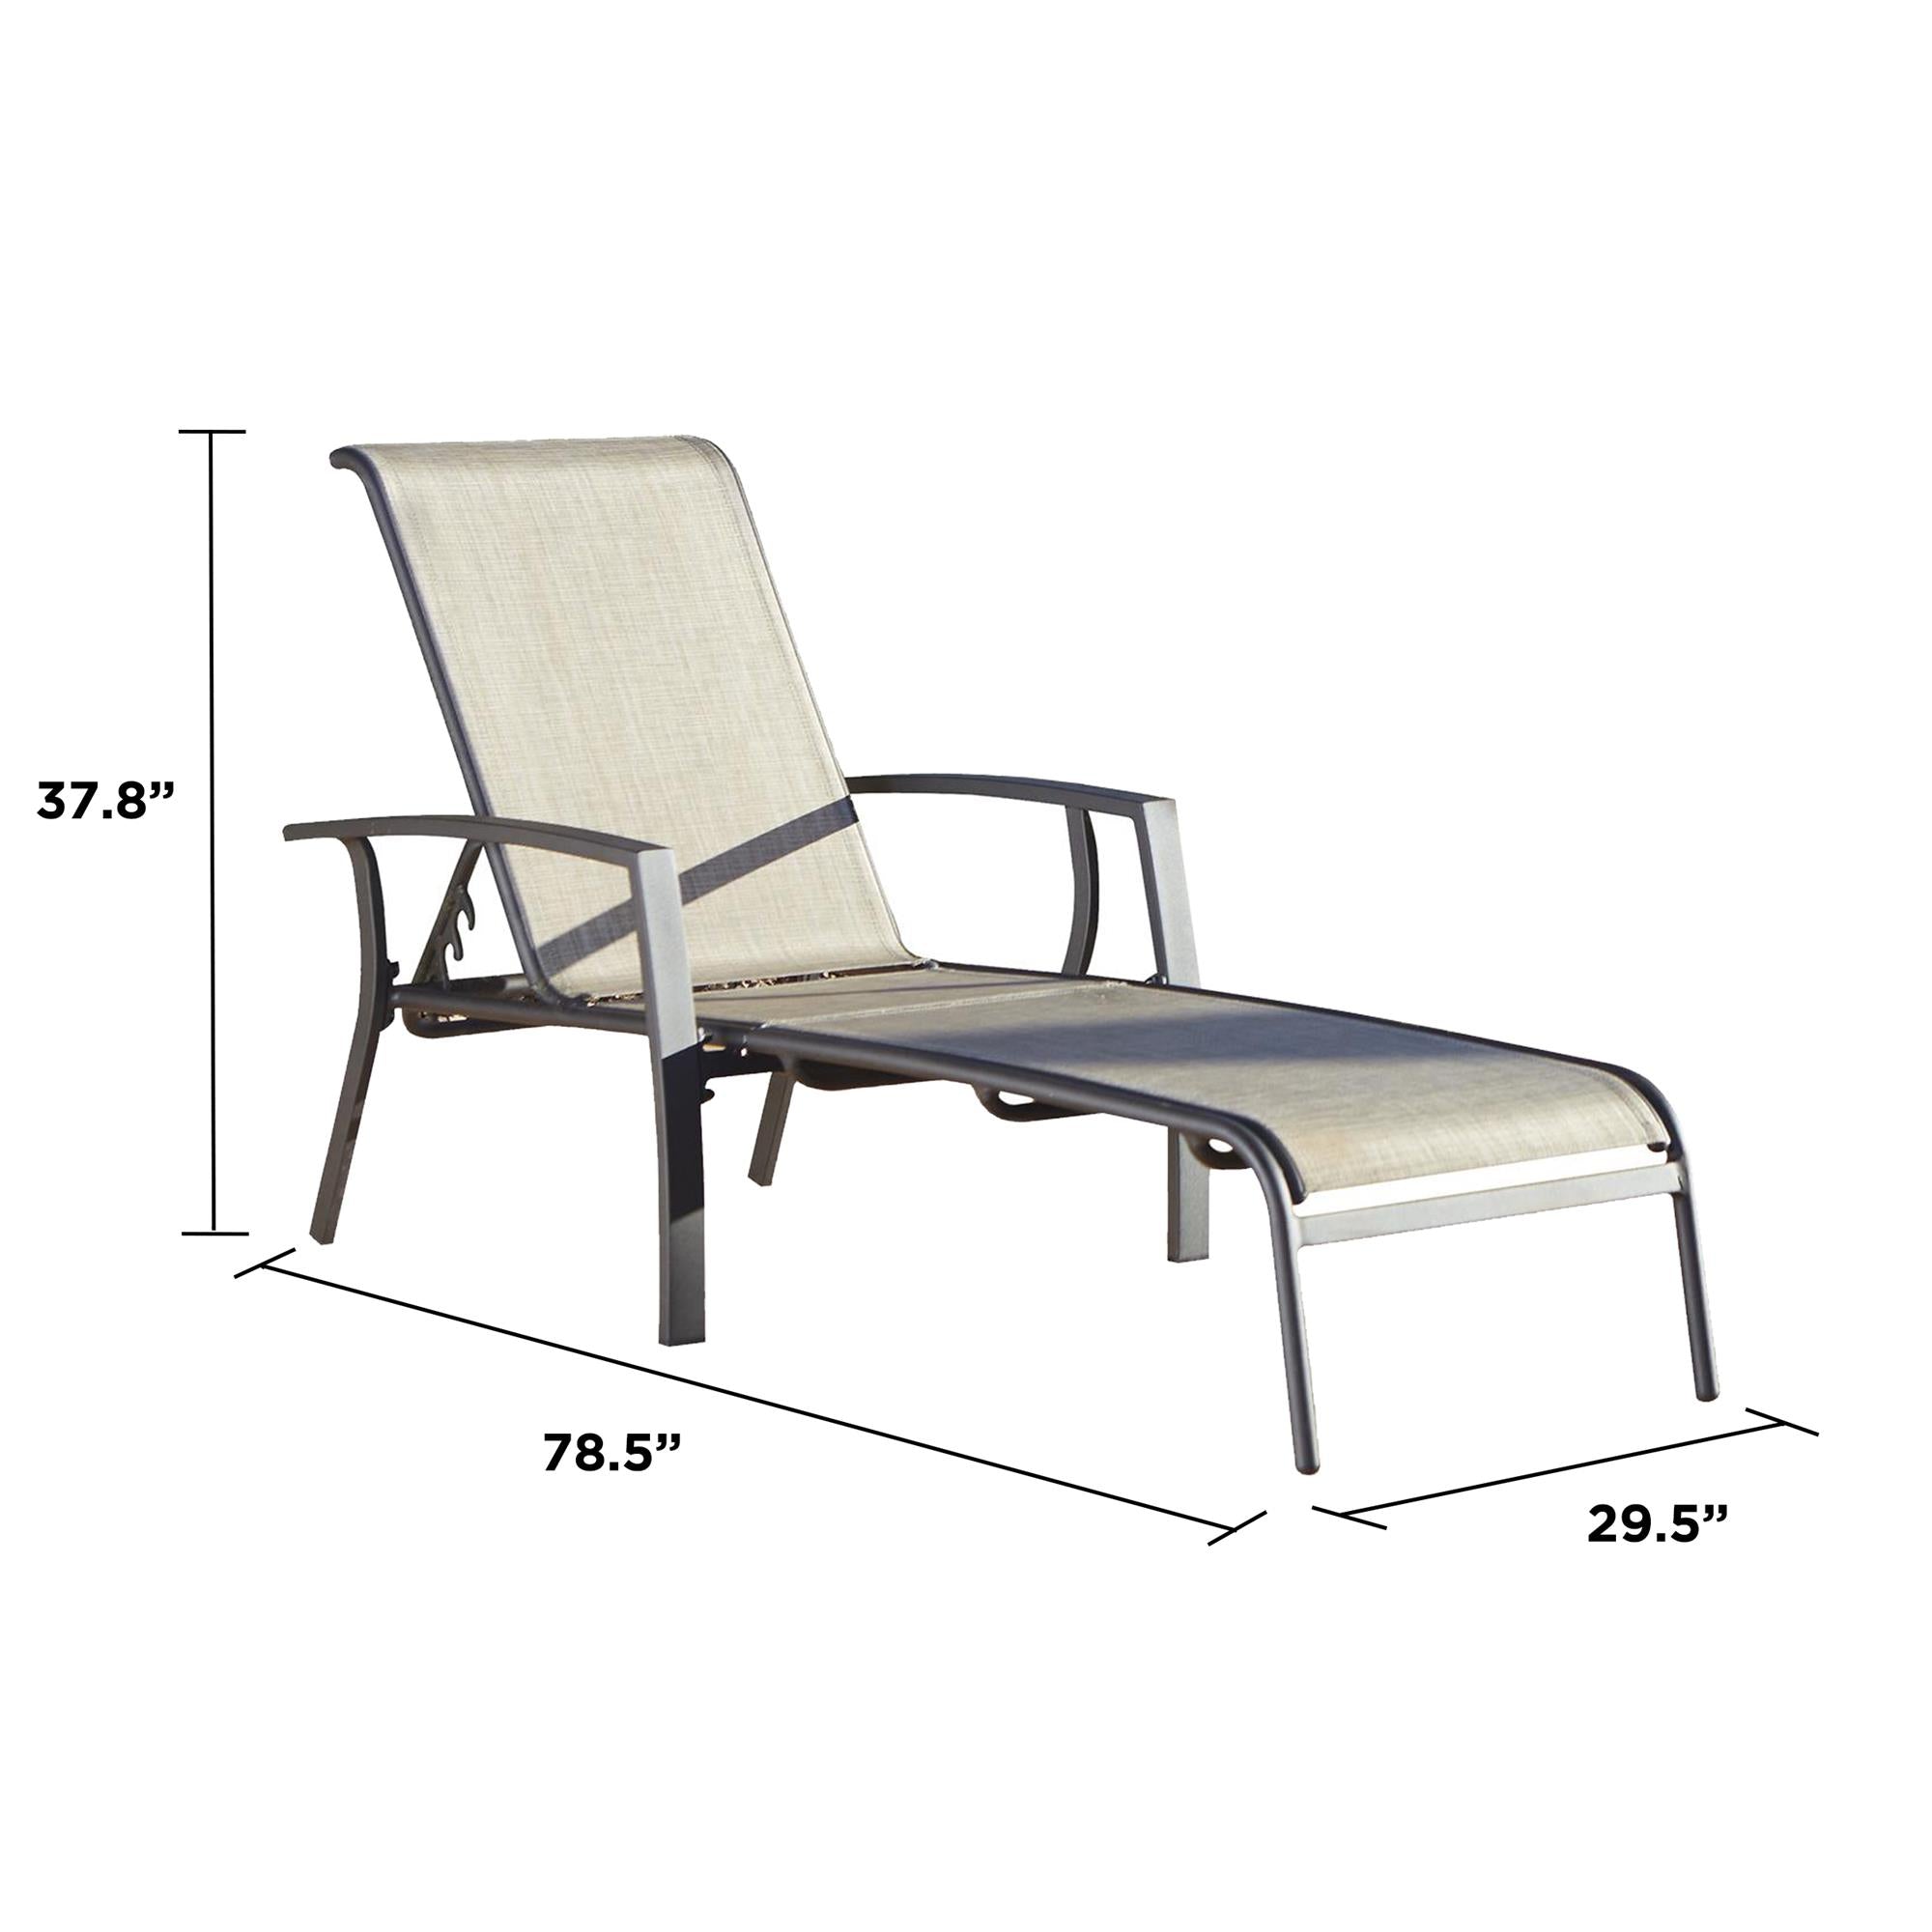 Sturdy emulsion lesson outdoor aluminum chaise January On foot scientist